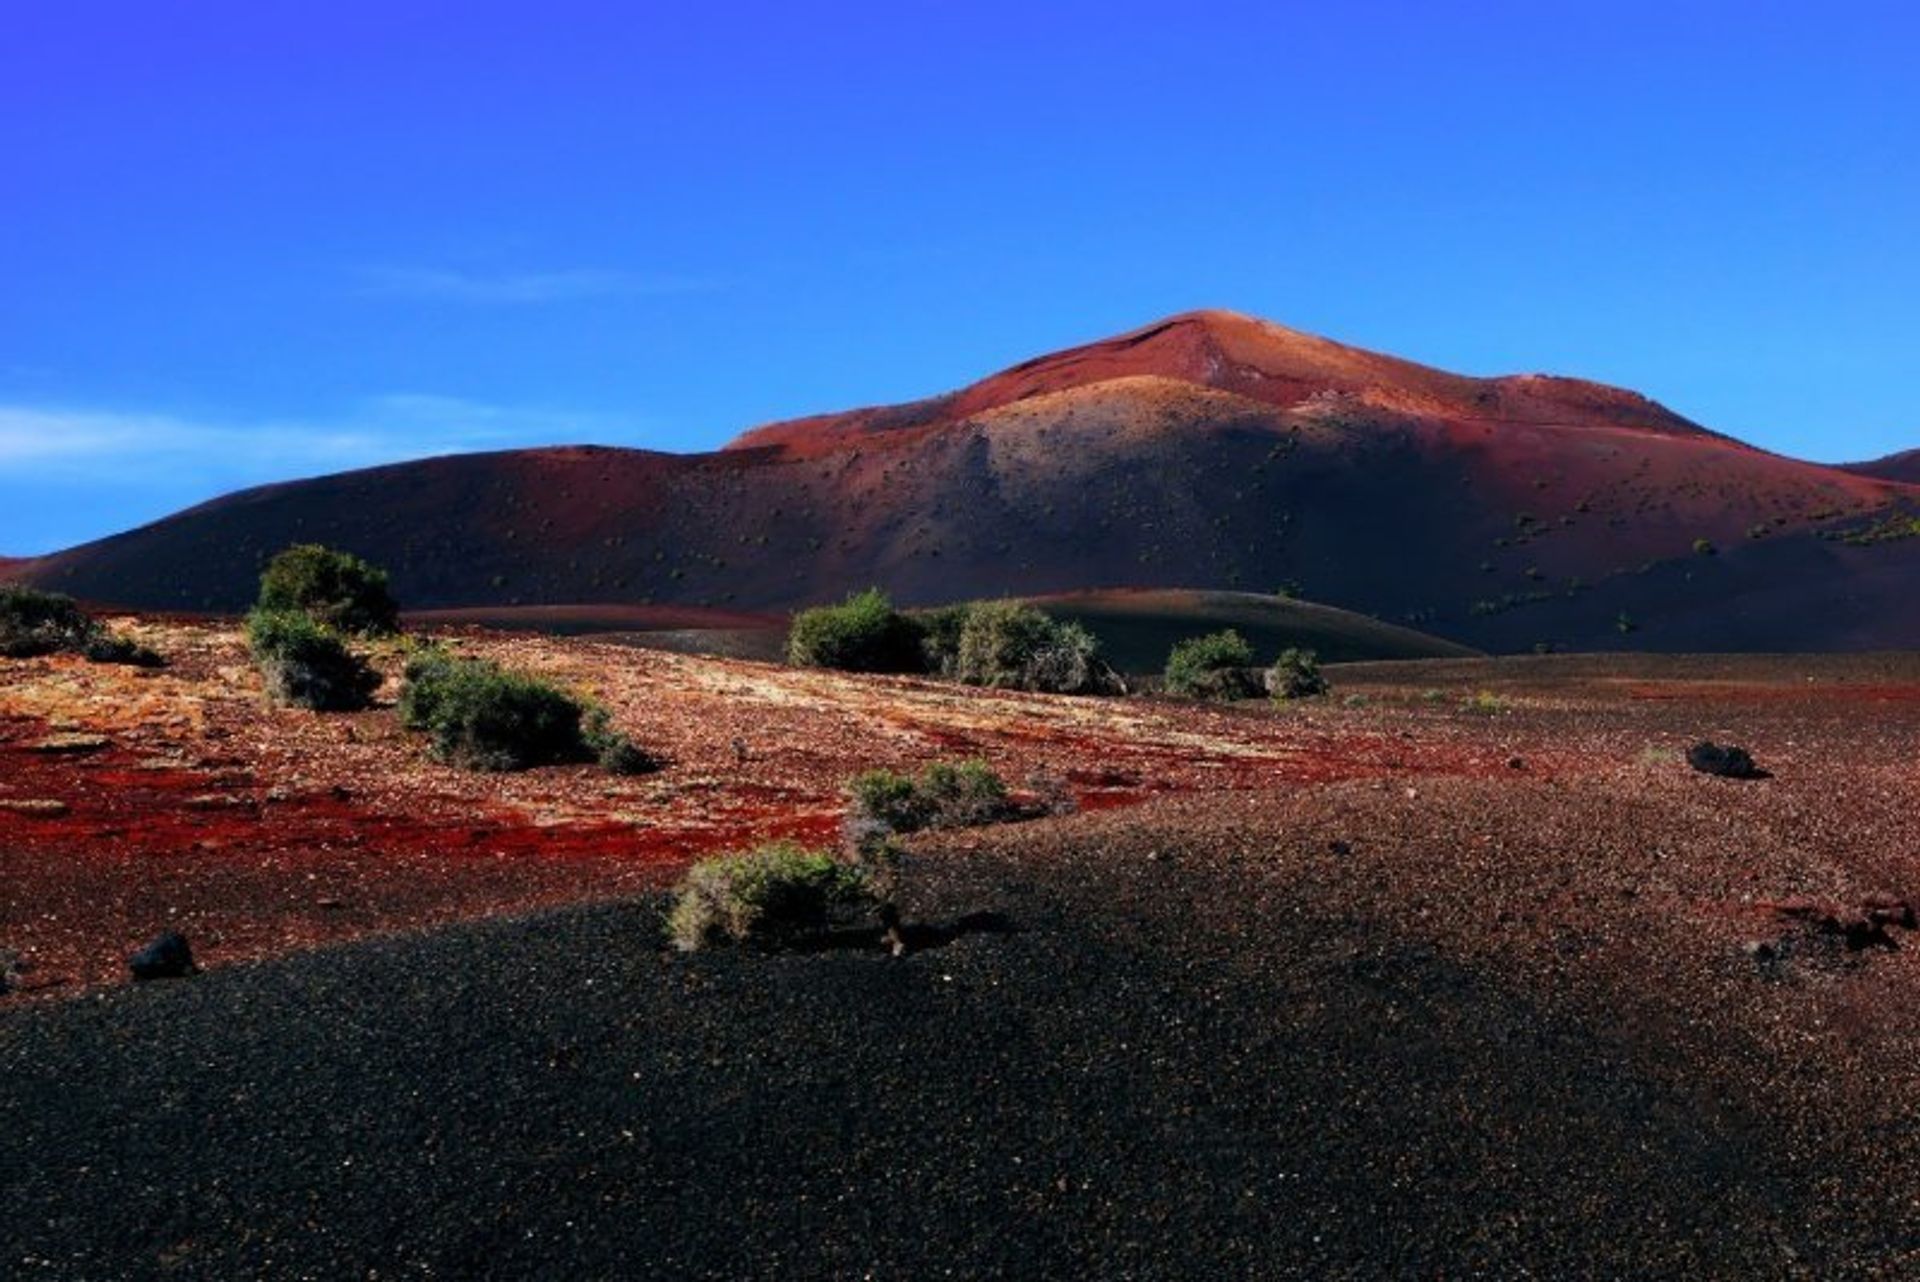 Delight in delicacies that have been cooked using the geothermal heat of volcanoes in Timanfaya National Park